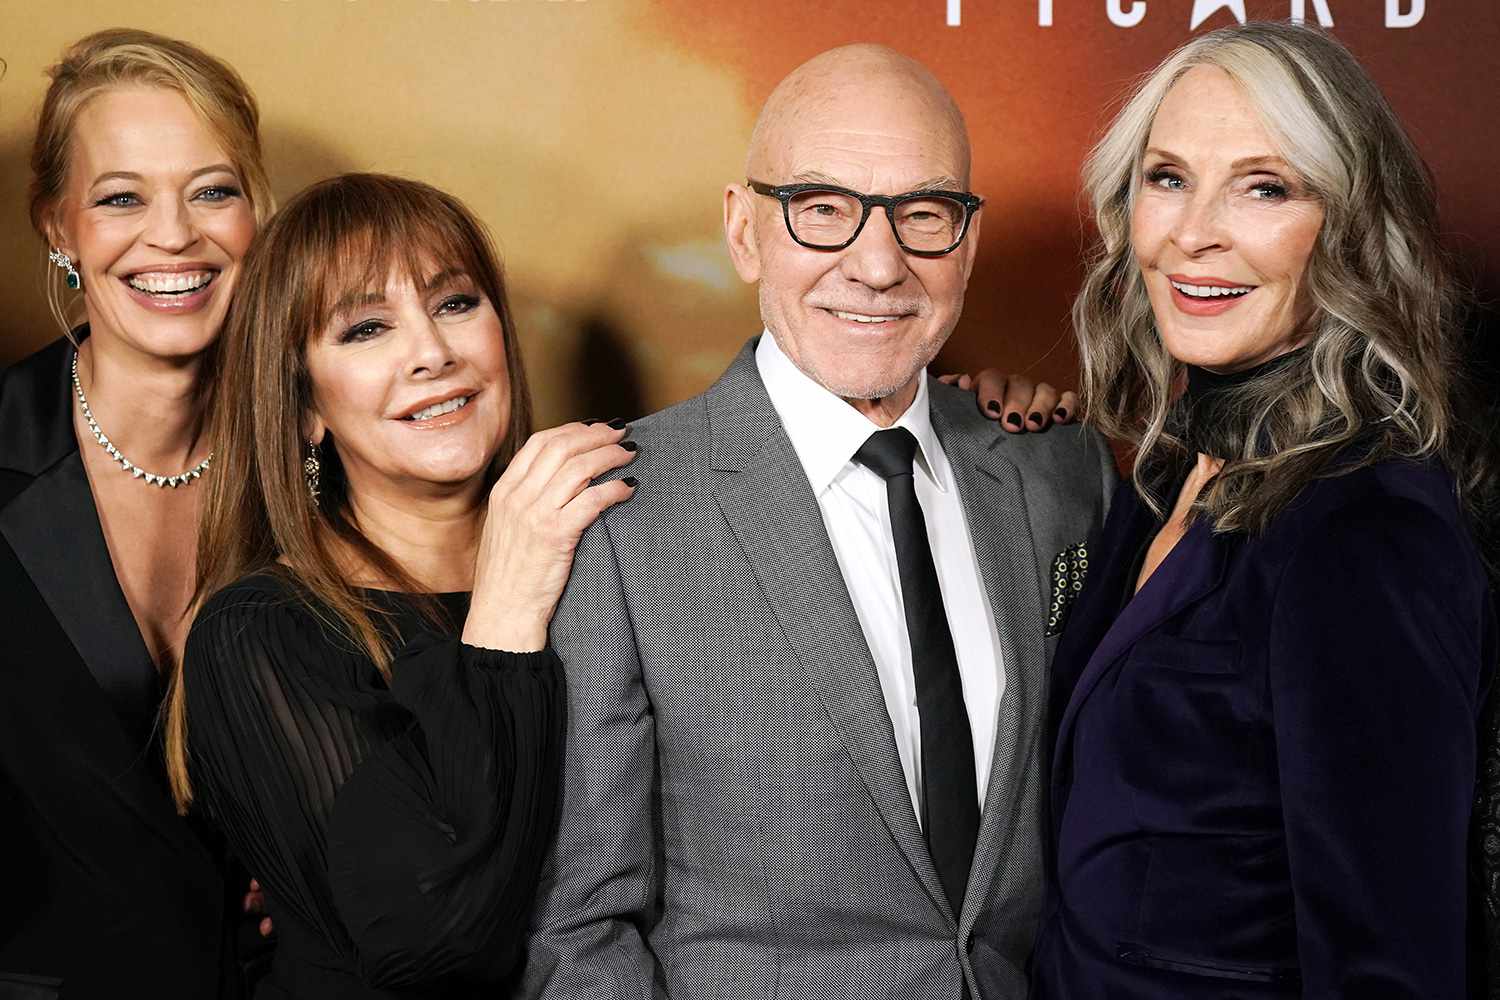 Jeri Ryan, Marina Sirtis, Patrick Stewart and Gates McFadden attend the premiere of "Star Trek: Picard" at ArcLight Cinerama Dome on January 13, 2020 in Hollywood